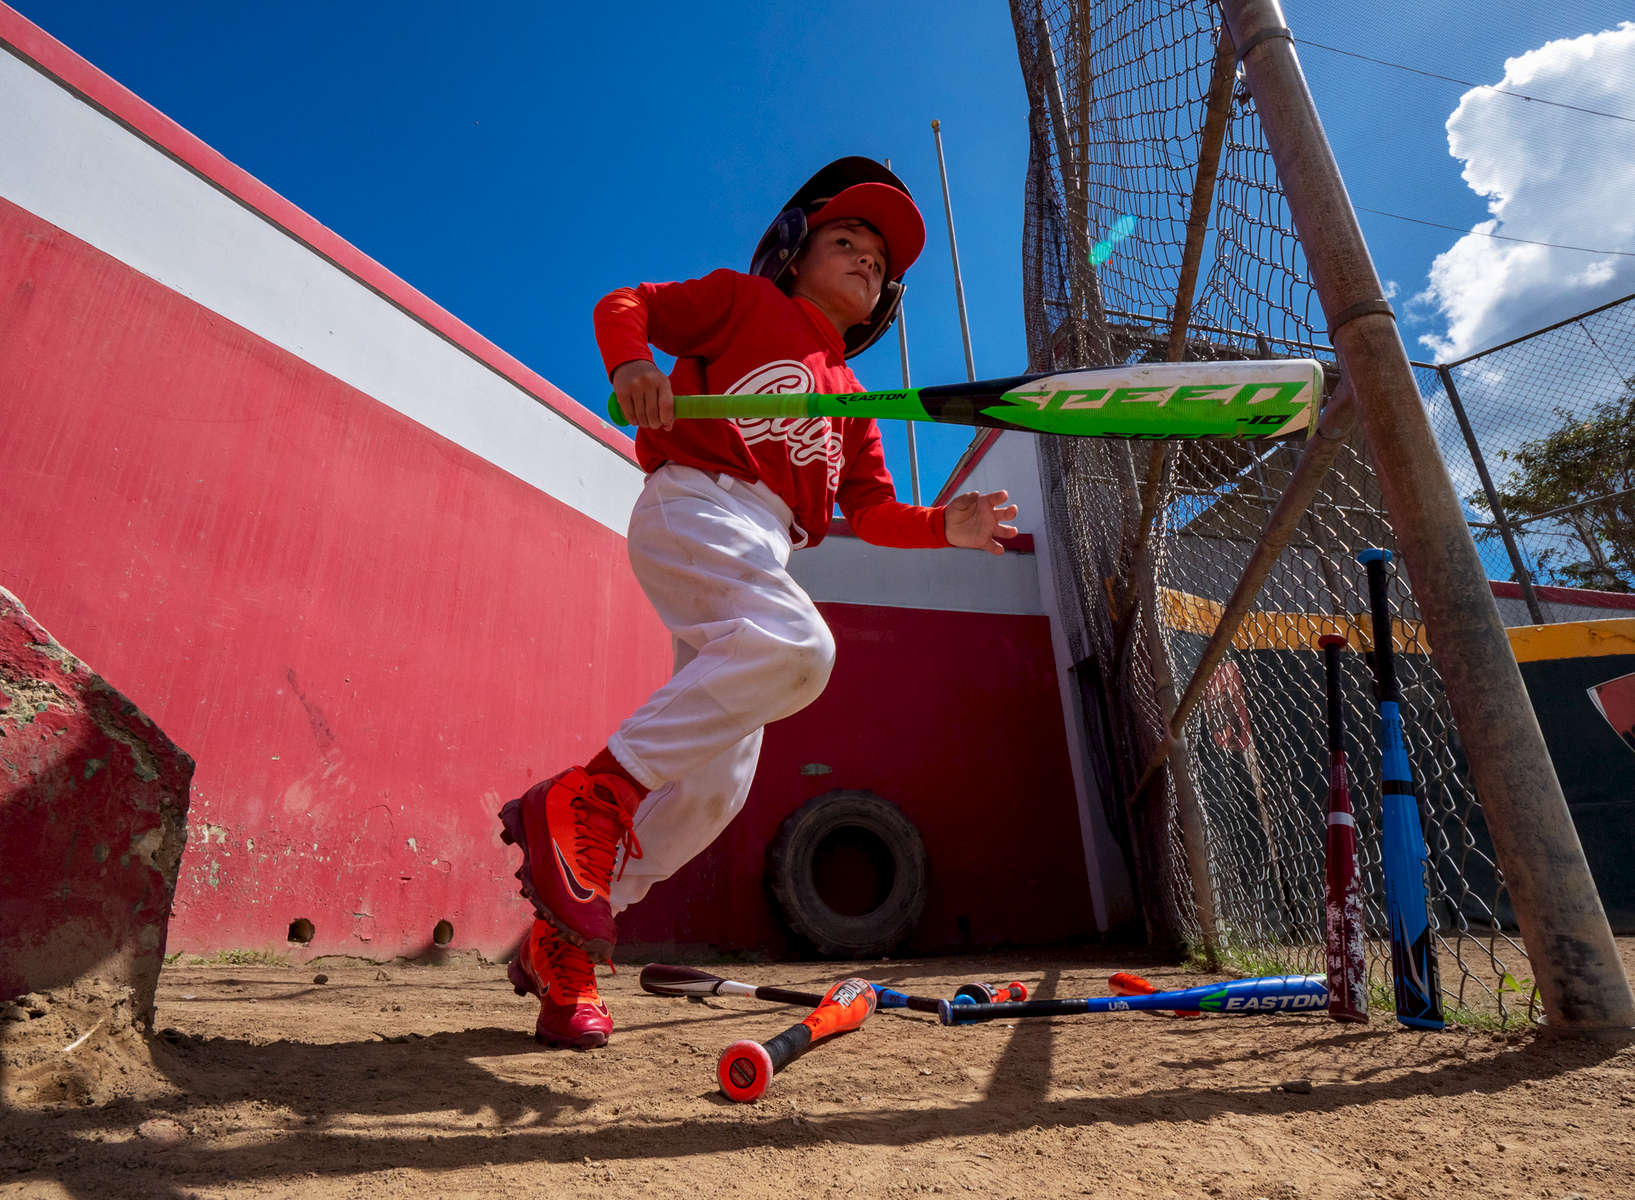 CAYEY, PUERTO RICO - NOVEMBER 10:  A boy prepares to bat in a Little League baseball game on November 10, 2018 in Cayey, Puerto Rico. The effort continues in Puerto Rico to remain and rebuild more than one year after the Hurricane Maria hit and devastated the island on September 20, 2017. The official number of deaths from the disaster is 2,975. 